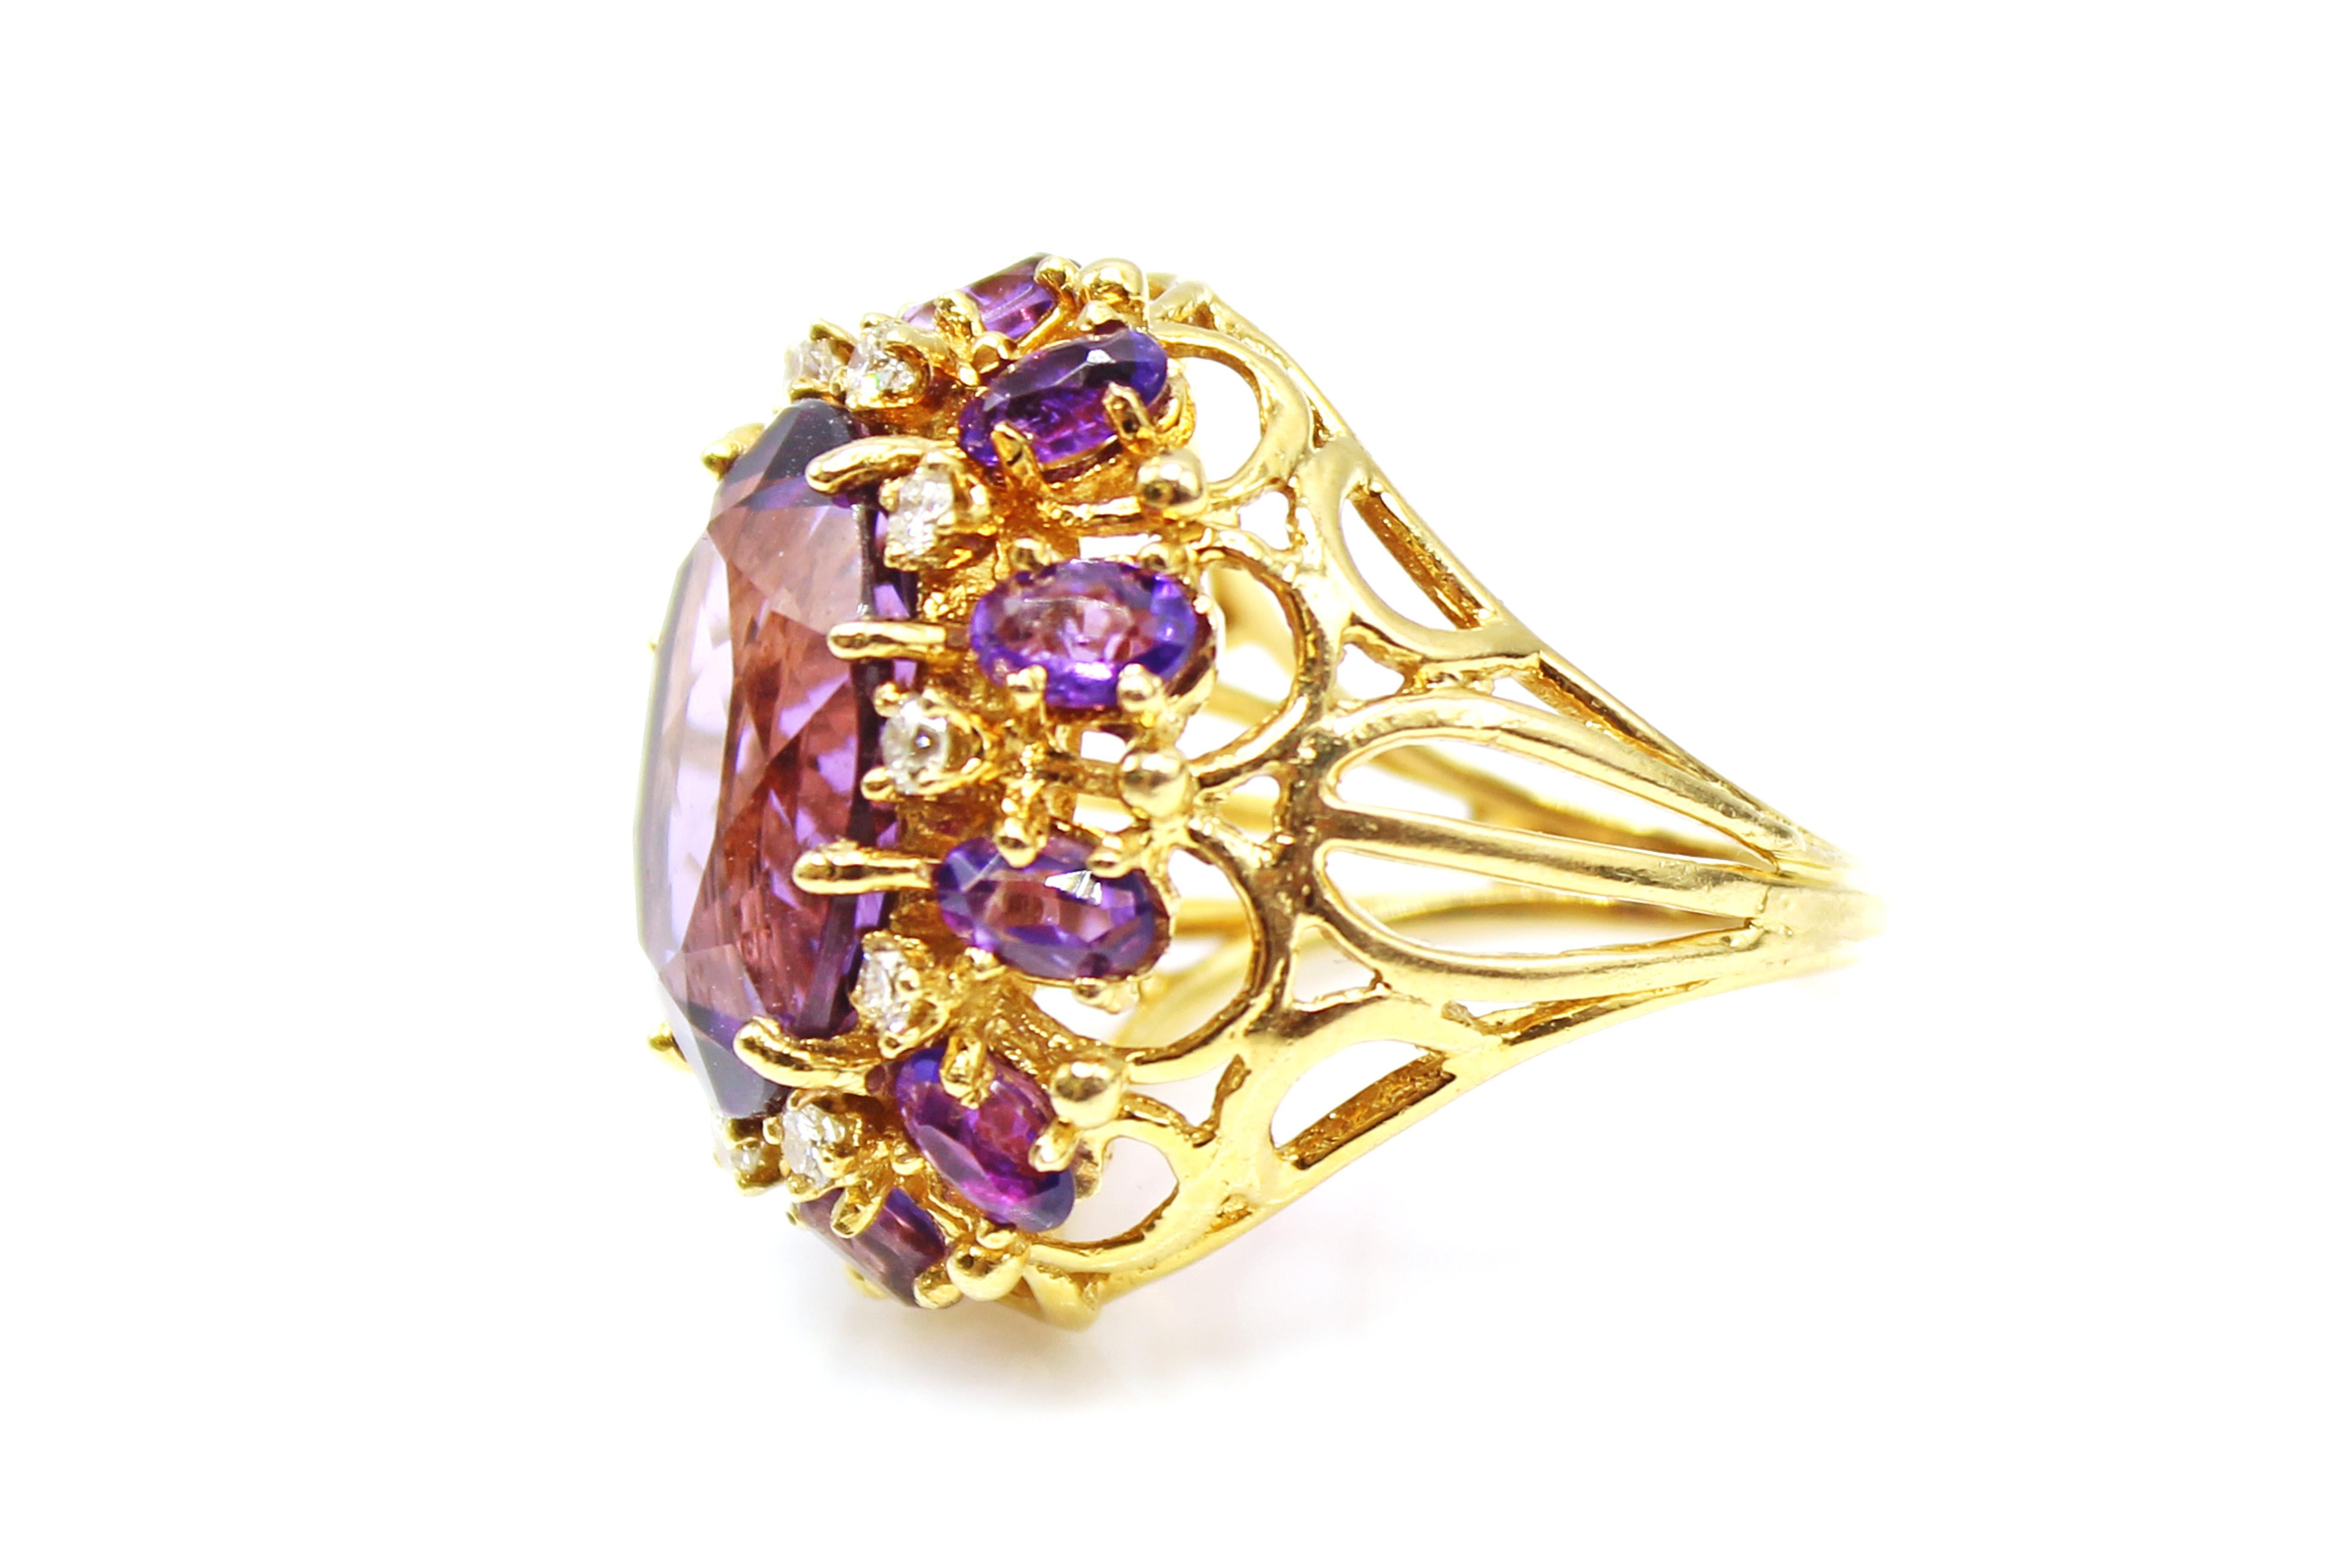 This stunning vivid purple amethyst is cut as a faceted oval, giving it an amazing sparkle, life and fire. Set in a masterfully hand-crafted yellow gold mounting, the 10 bright white sparking diamonds and 10 smaller oval amethysts surrounding the